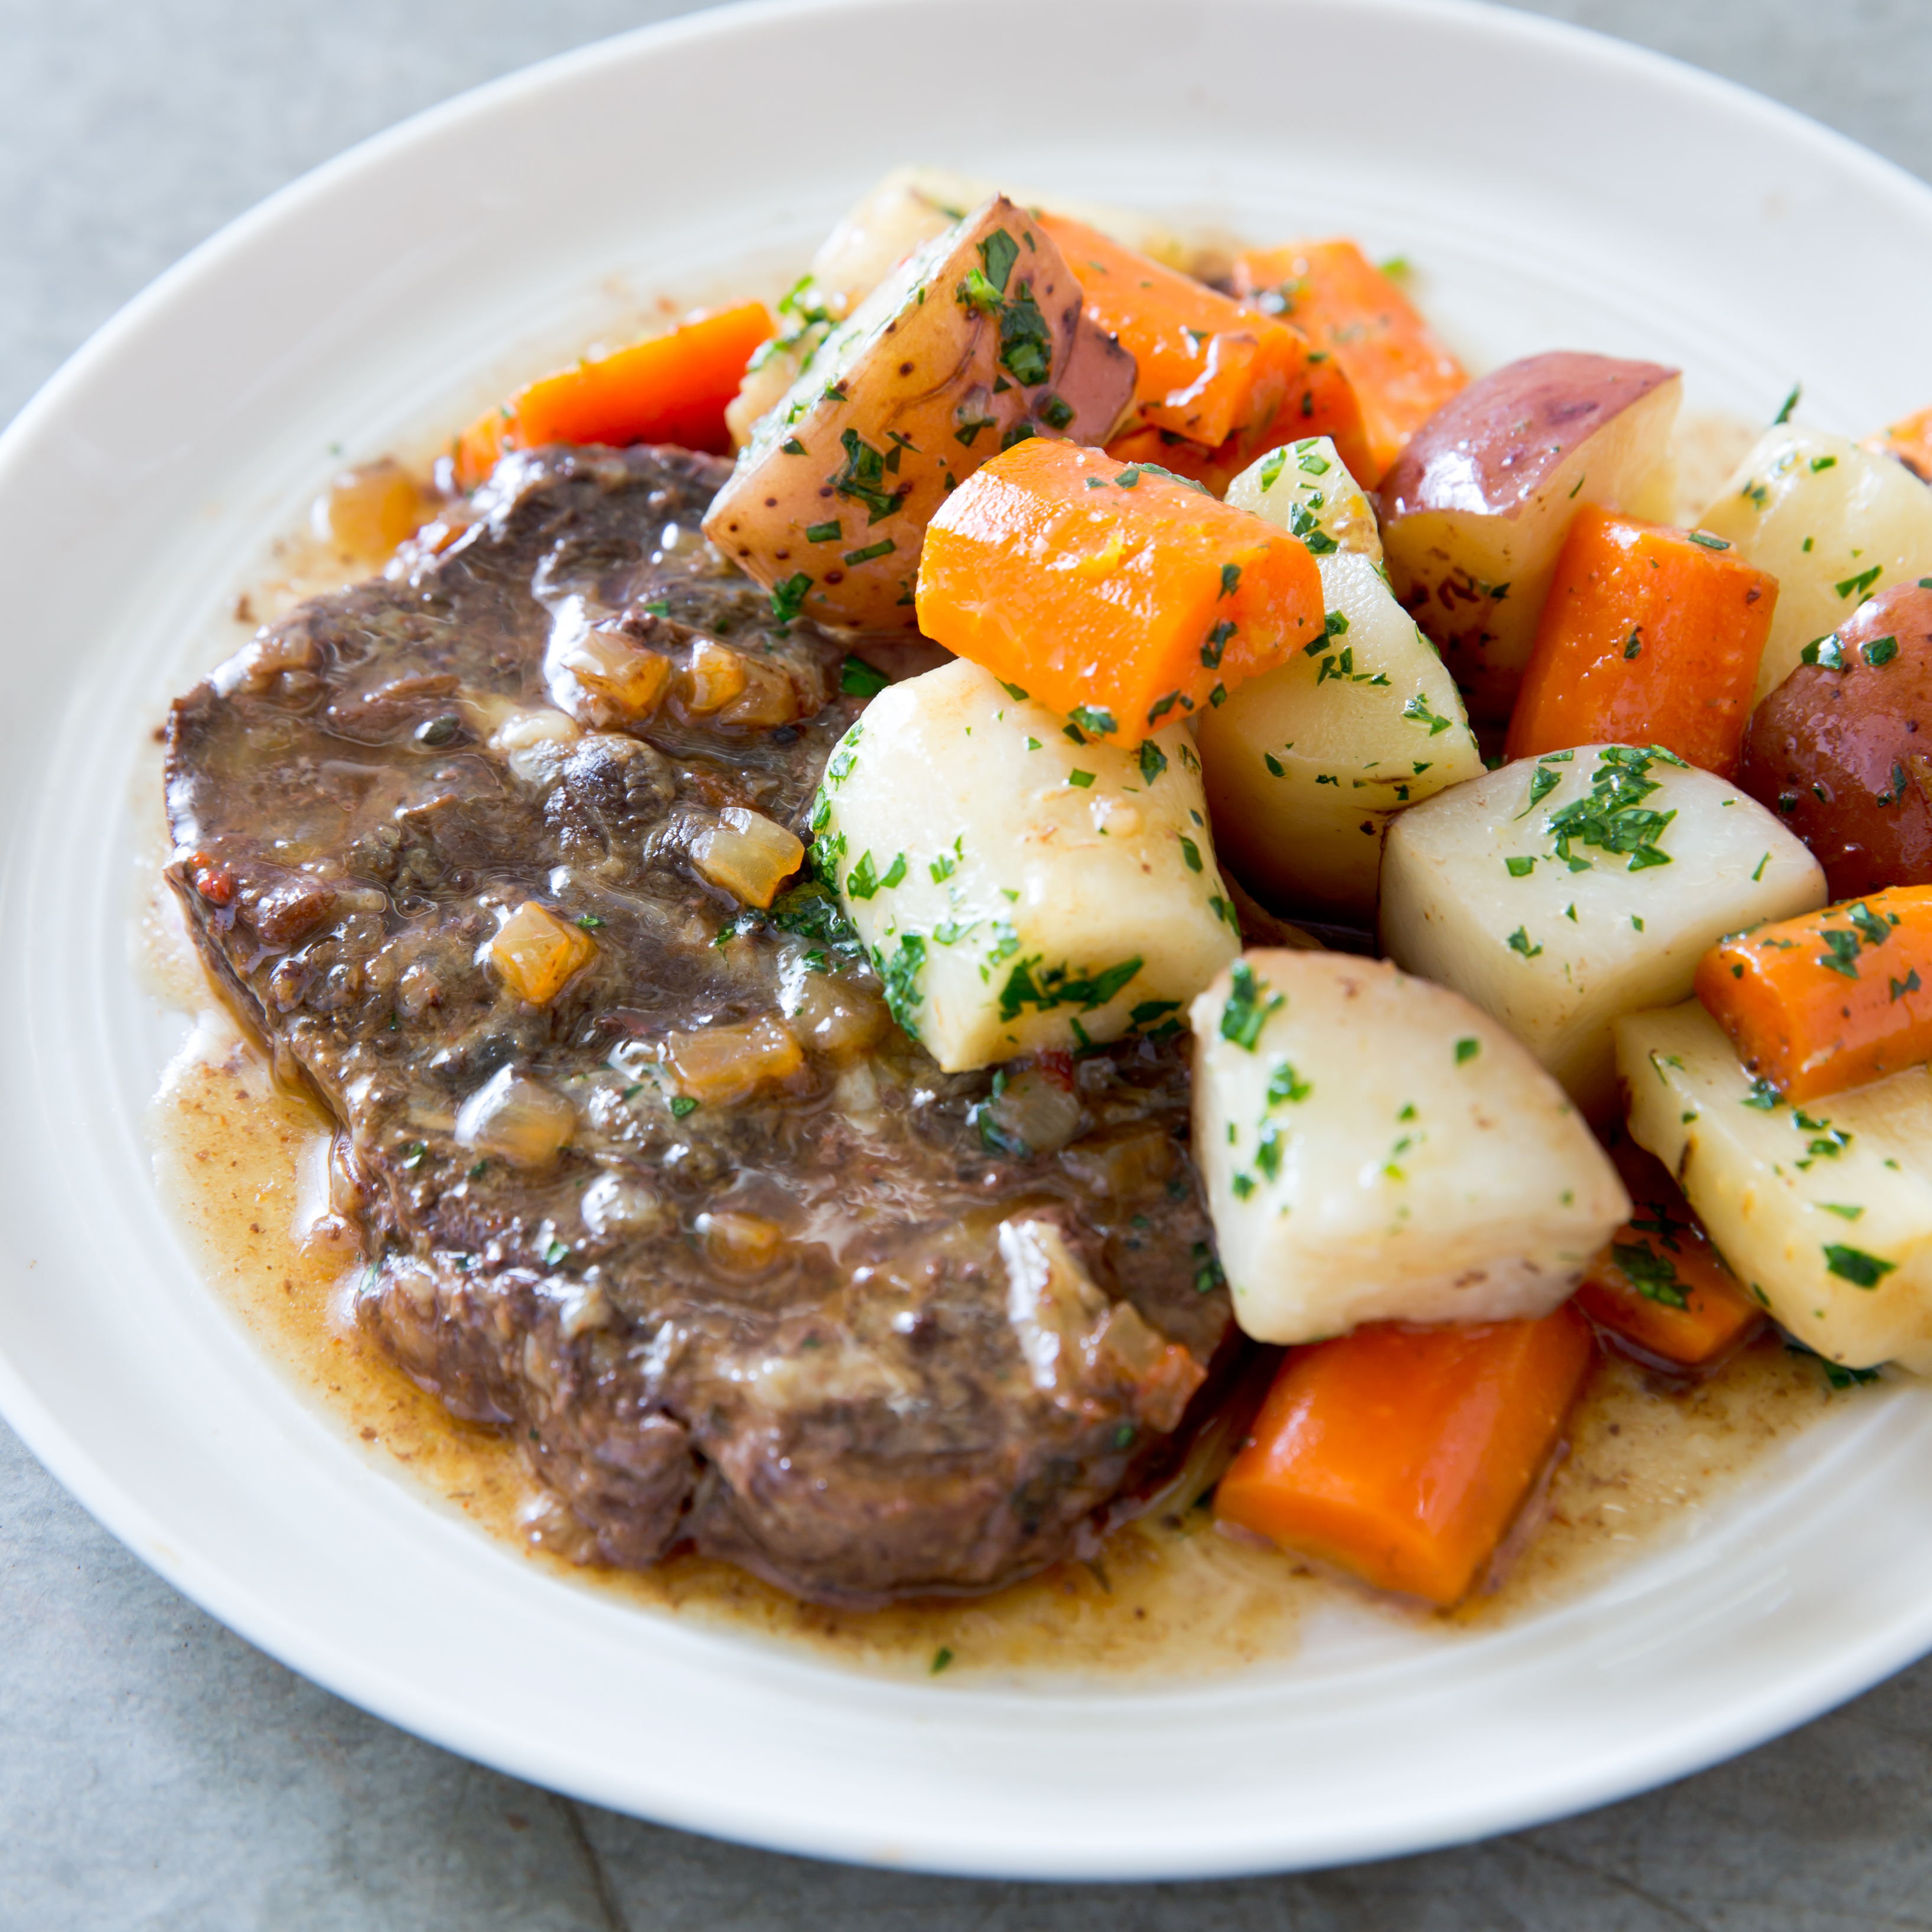 https://res.cloudinary.com/hksqkdlah/image/upload/32357_sfs-braised-steaks-with-root-vegetables-12.jpg